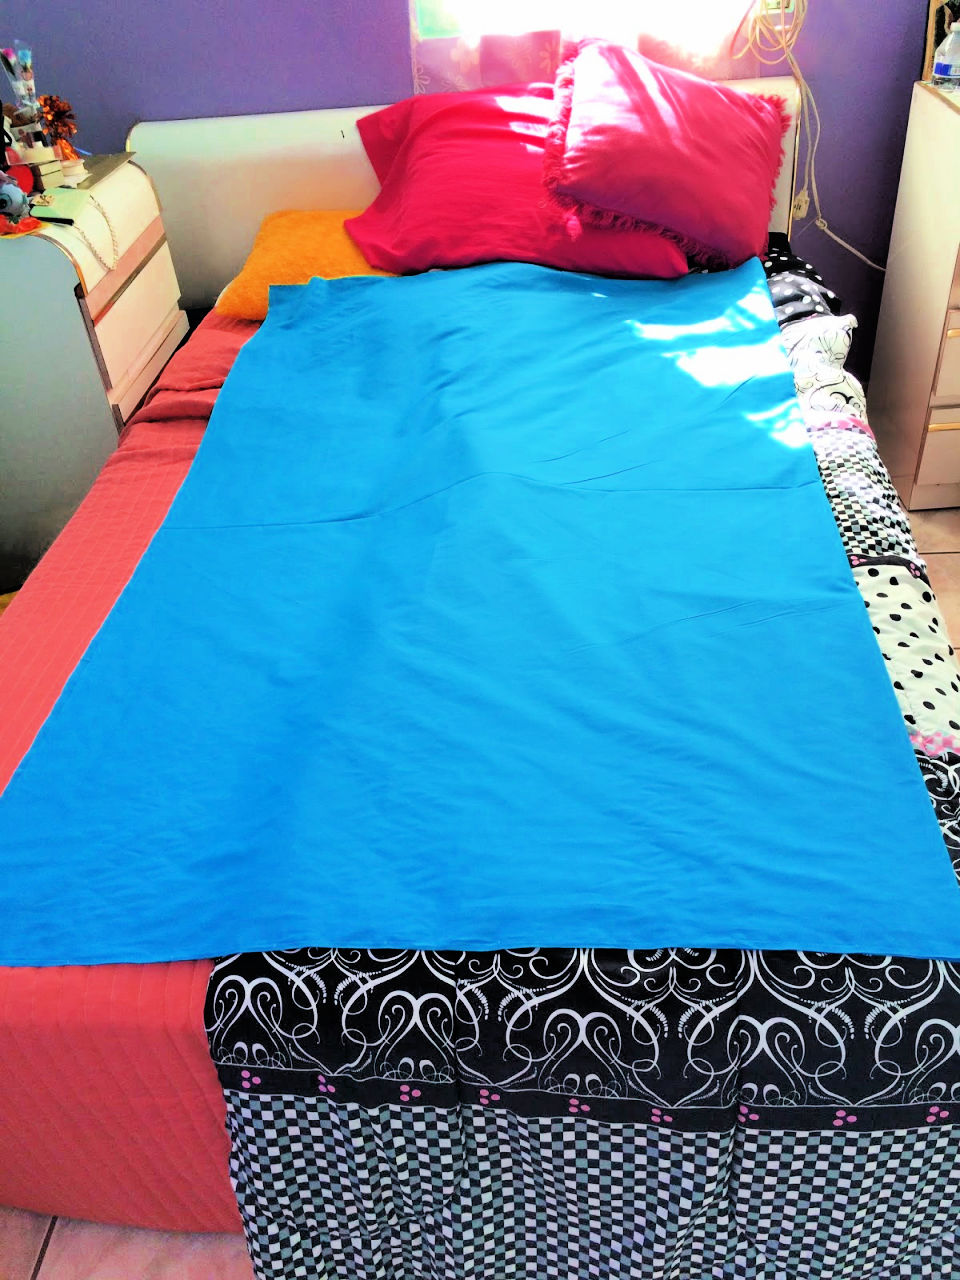 How To Make A Weighted Blanket • Its Overflowing